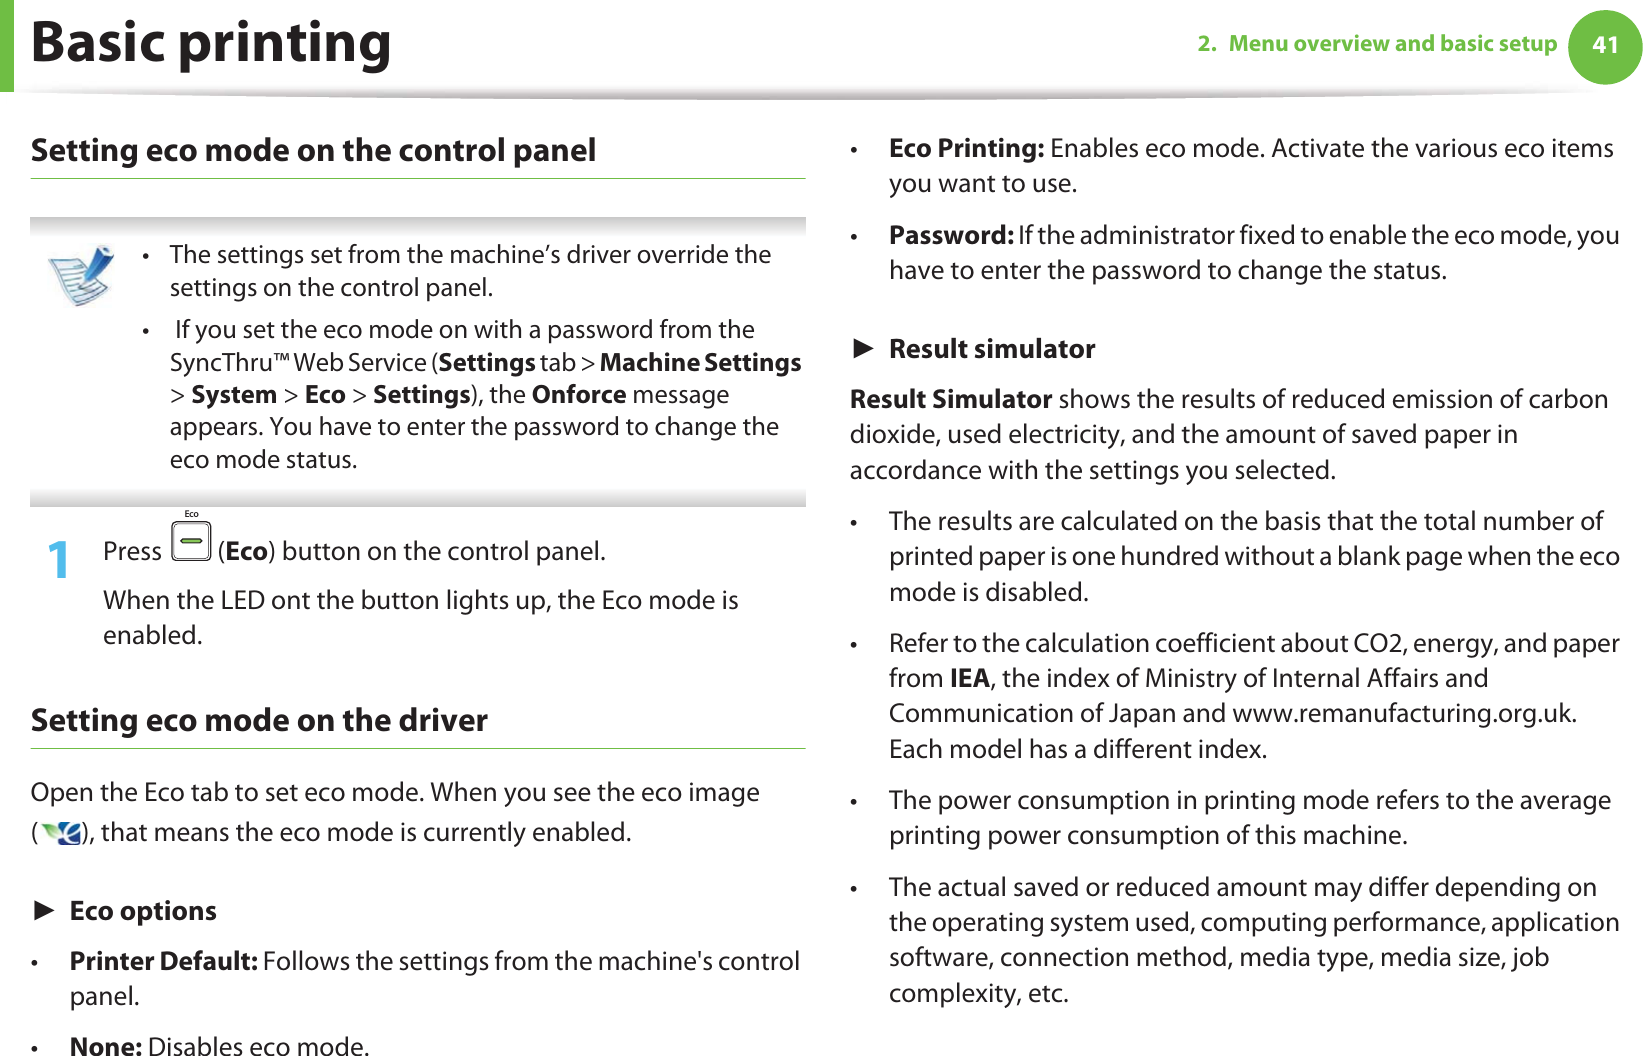 Basic printing 412. Menu overview and basic setupSetting eco mode on the control panel • The settings set from the machine’s driver override the settings on the control panel.•  If you set the eco mode on with a password from the SyncThru™ Web Service (Settings tab &gt; Machine Settings &gt; System &gt; Eco &gt; Settings), the Onforce message appears. You have to enter the password to change the eco mode status. 1Press  (Eco) button on the control panel. When the LED ont the button lights up, the Eco mode is enabled.Setting eco mode on the driverOpen the Eco tab to set eco mode. When you see the eco image ( ), that means the eco mode is currently enabled.ŹEco options•Printer Default: Follows the settings from the machine&apos;s control panel.•None: Disables eco mode.•Eco Printing: Enables eco mode. Activate the various eco items you want to use.•Password: If the administrator fixed to enable the eco mode, you have to enter the password to change the status. ŹResult simulatorResult Simulator shows the results of reduced emission of carbon dioxide, used electricity, and the amount of saved paper in accordance with the settings you selected.• The results are calculated on the basis that the total number of printed paper is one hundred without a blank page when the eco mode is disabled.• Refer to the calculation coefficient about CO2, energy, and paper from IEA, the index of Ministry of Internal Affairs and Communication of Japan and www.remanufacturing.org.uk. Each model has a different index. • The power consumption in printing mode refers to the average printing power consumption of this machine. • The actual saved or reduced amount may differ depending on the operating system used, computing performance, application software, connection method, media type, media size, job complexity, etc.Eco